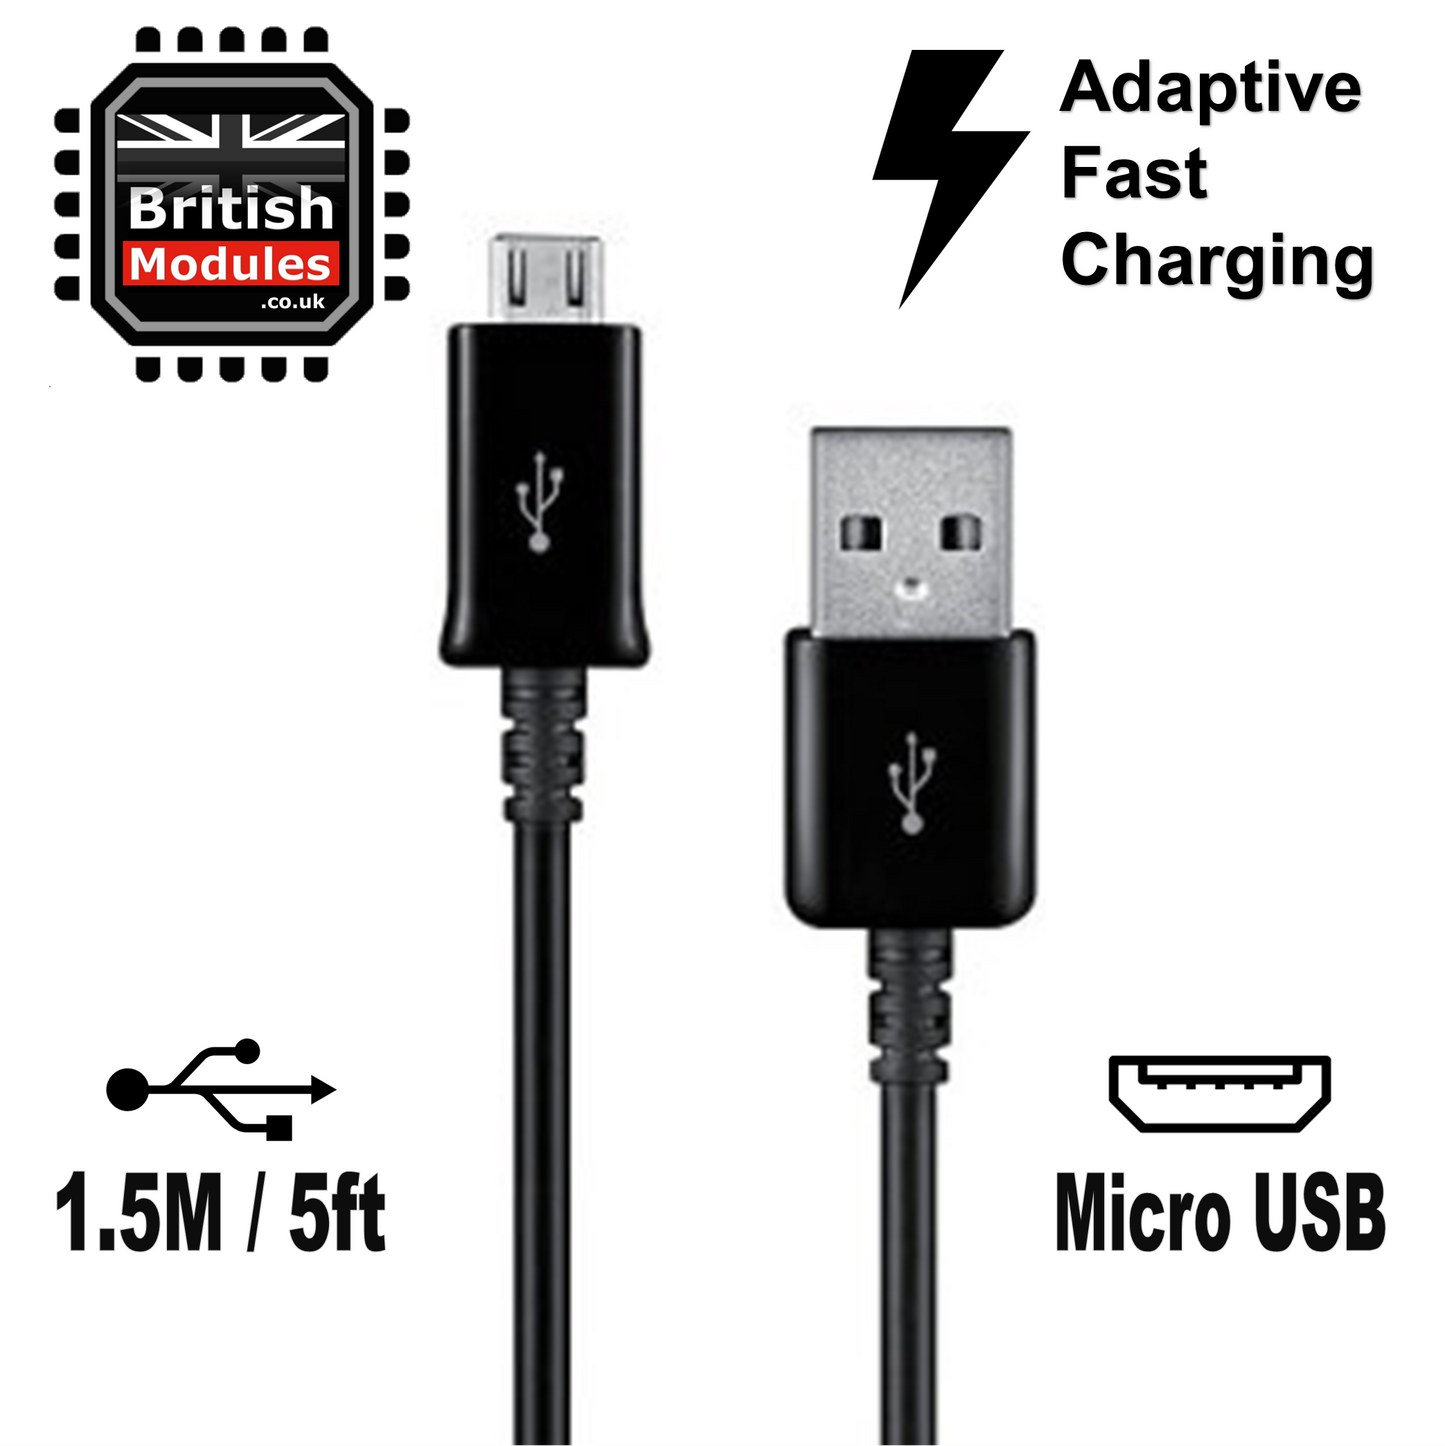 Genuine Samsung 1.5M Micro USB Charging Data Cable for Galaxy S7, S7 Edge, S6, S5, S4, Note 5, Note 4 Tab Black 5-Feet ECB-DU4EBE